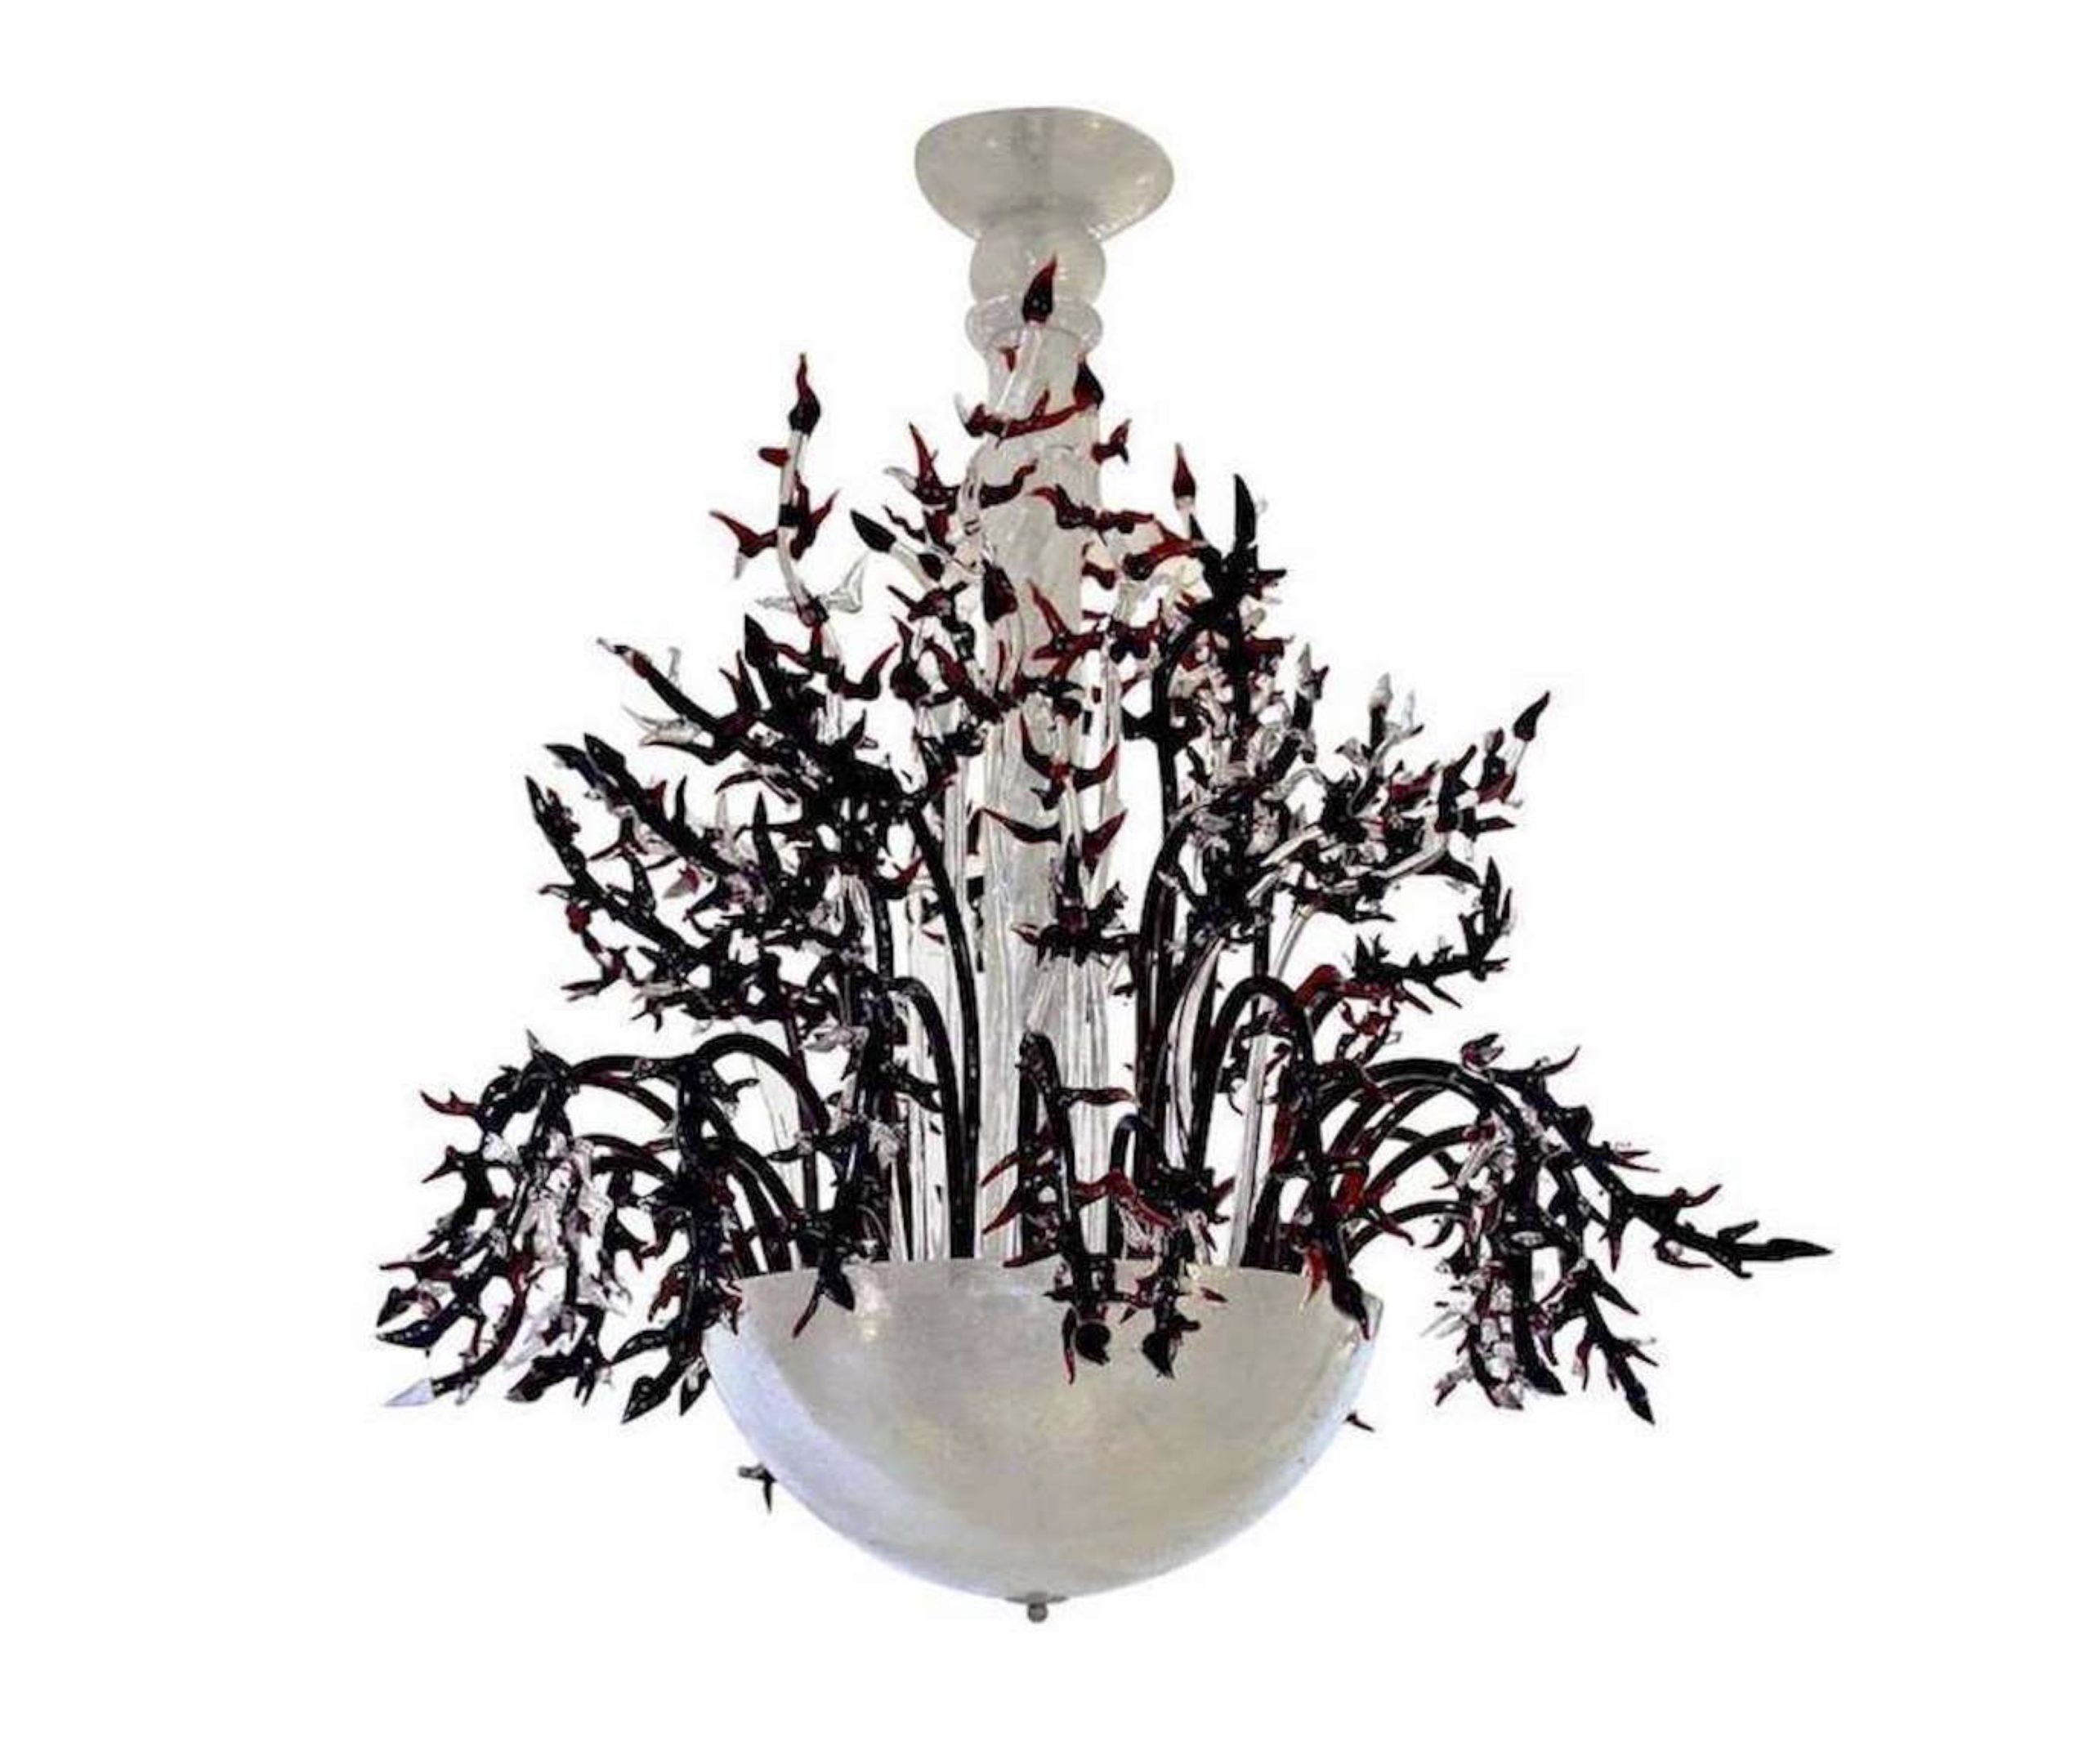 cosulich_interiors_and_antiques_products_new_york_design_1980s_Italian_White_Murano_Glass_Chandelier_Decor-scaled-1